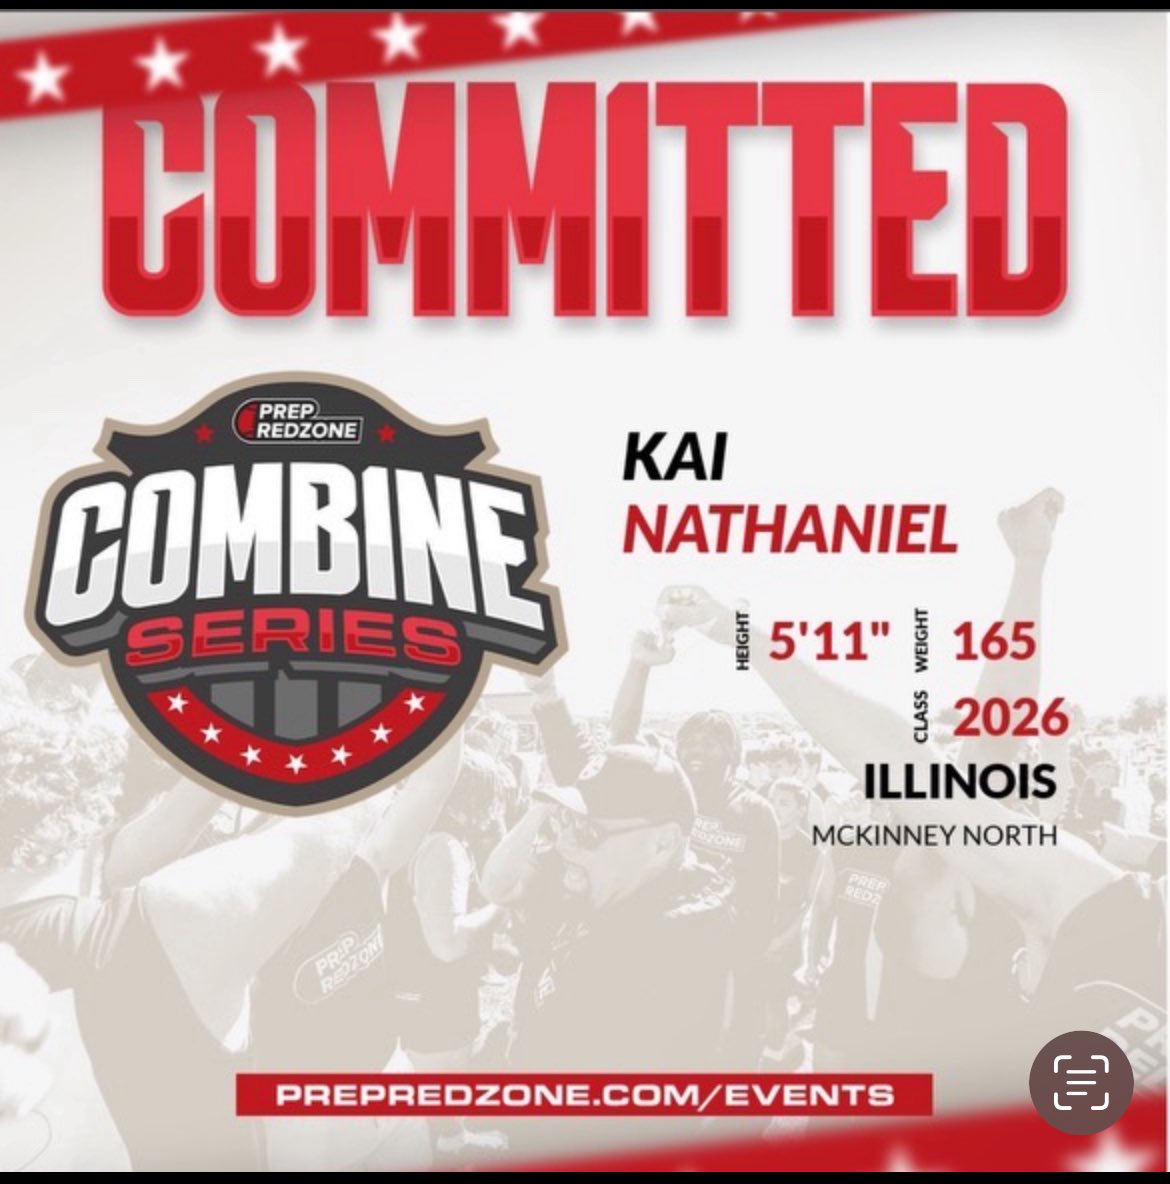 Couldn’t make it to the combine in FortWorth, glad to still be able to compete in Illinois this Saturday! @PrepRedzoneIL @JcaAthletics @McKinneyNorthHS @HilltoppersFB